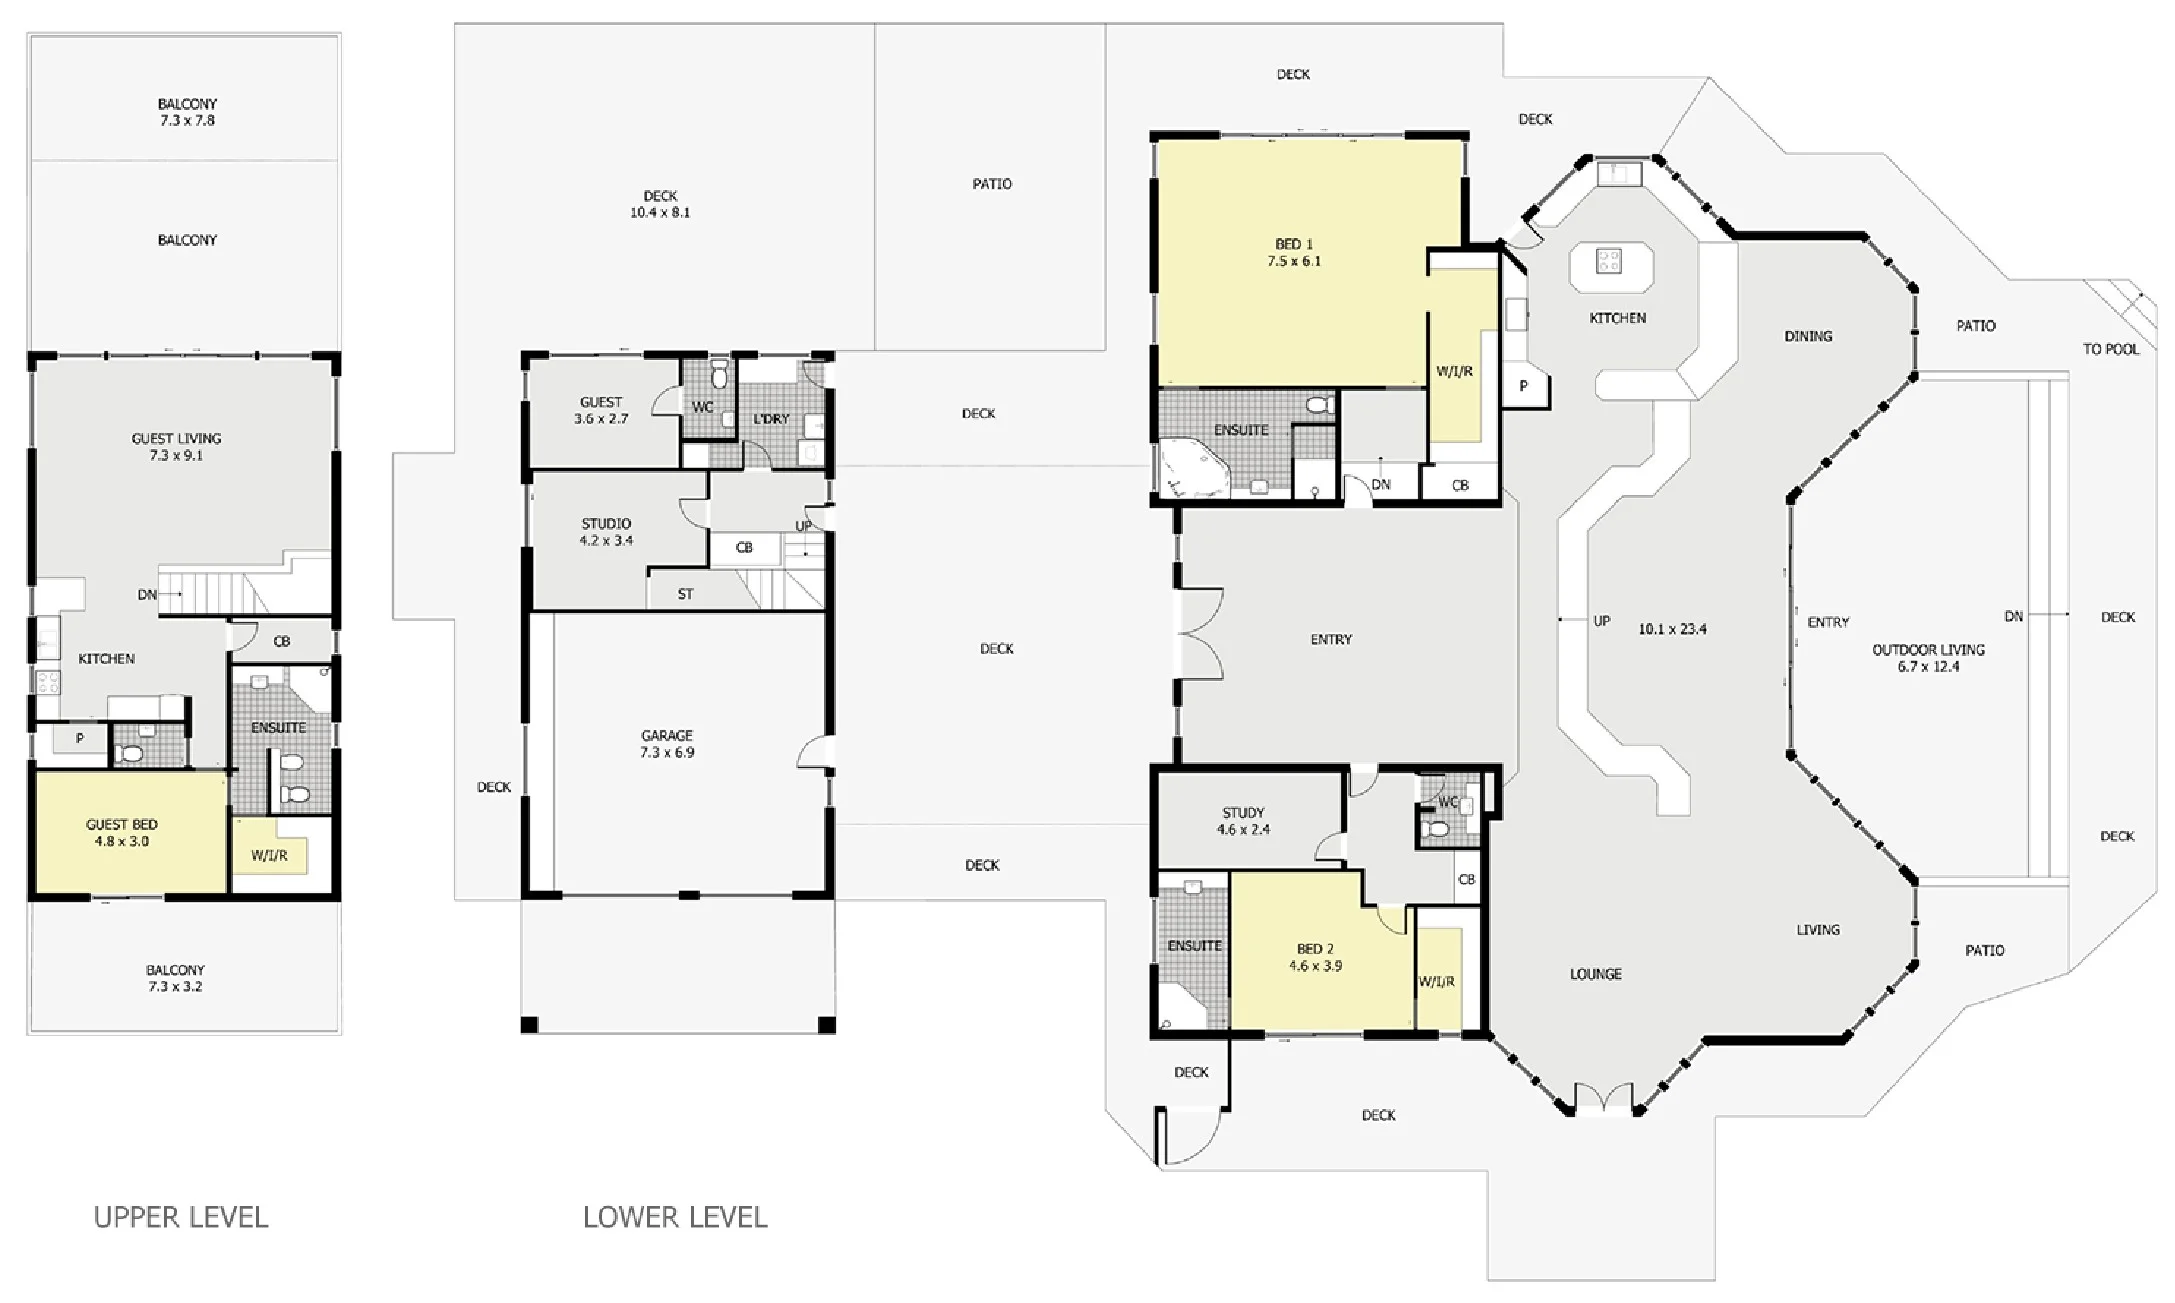 Interactive floor plan design of a house including upper level and lower level.